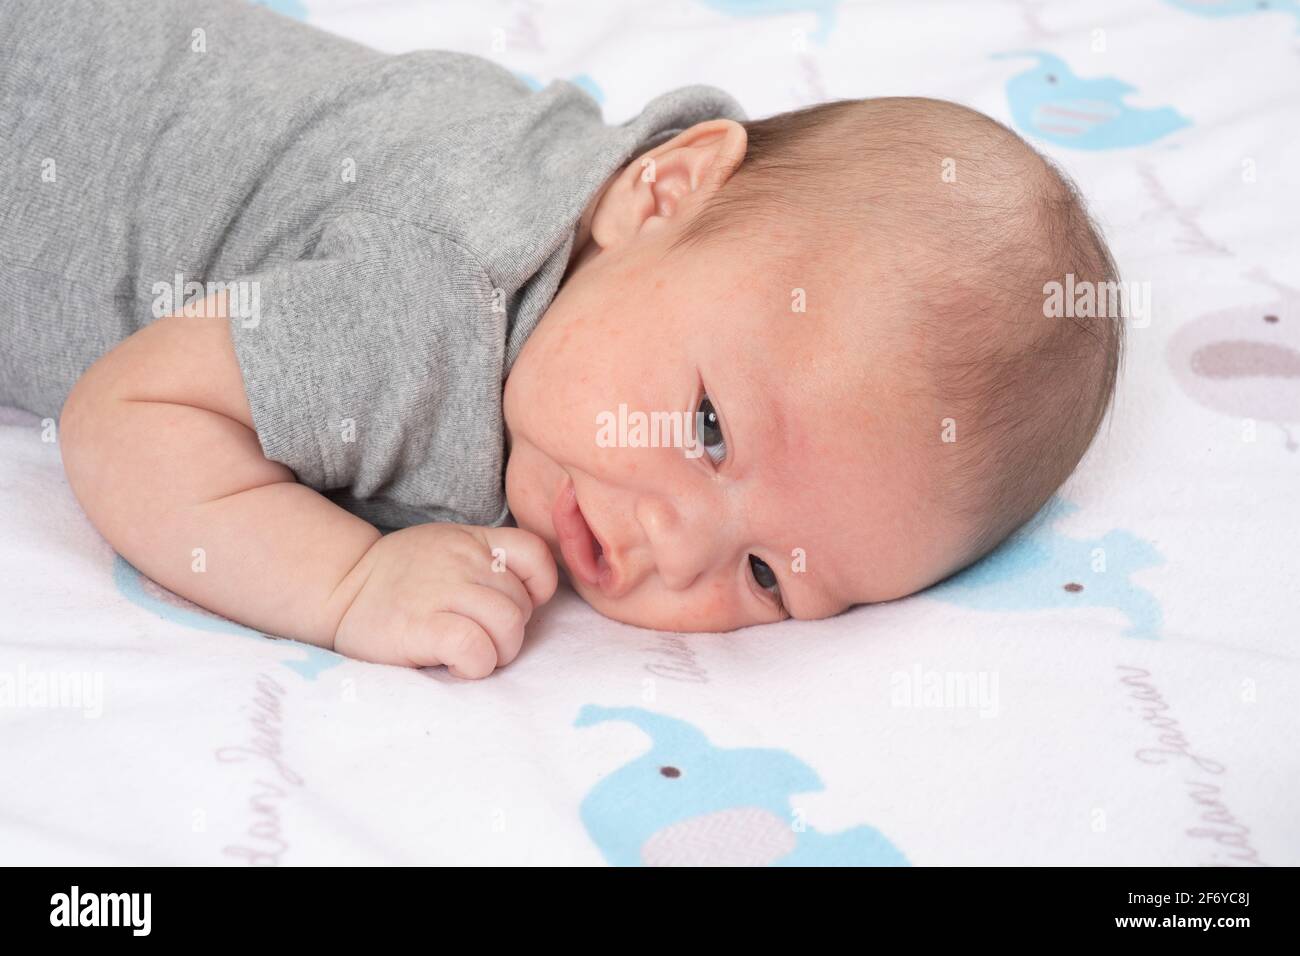 Newborn baby boy 7 weeks old alert close up on stomach head turned to side Stock Photo